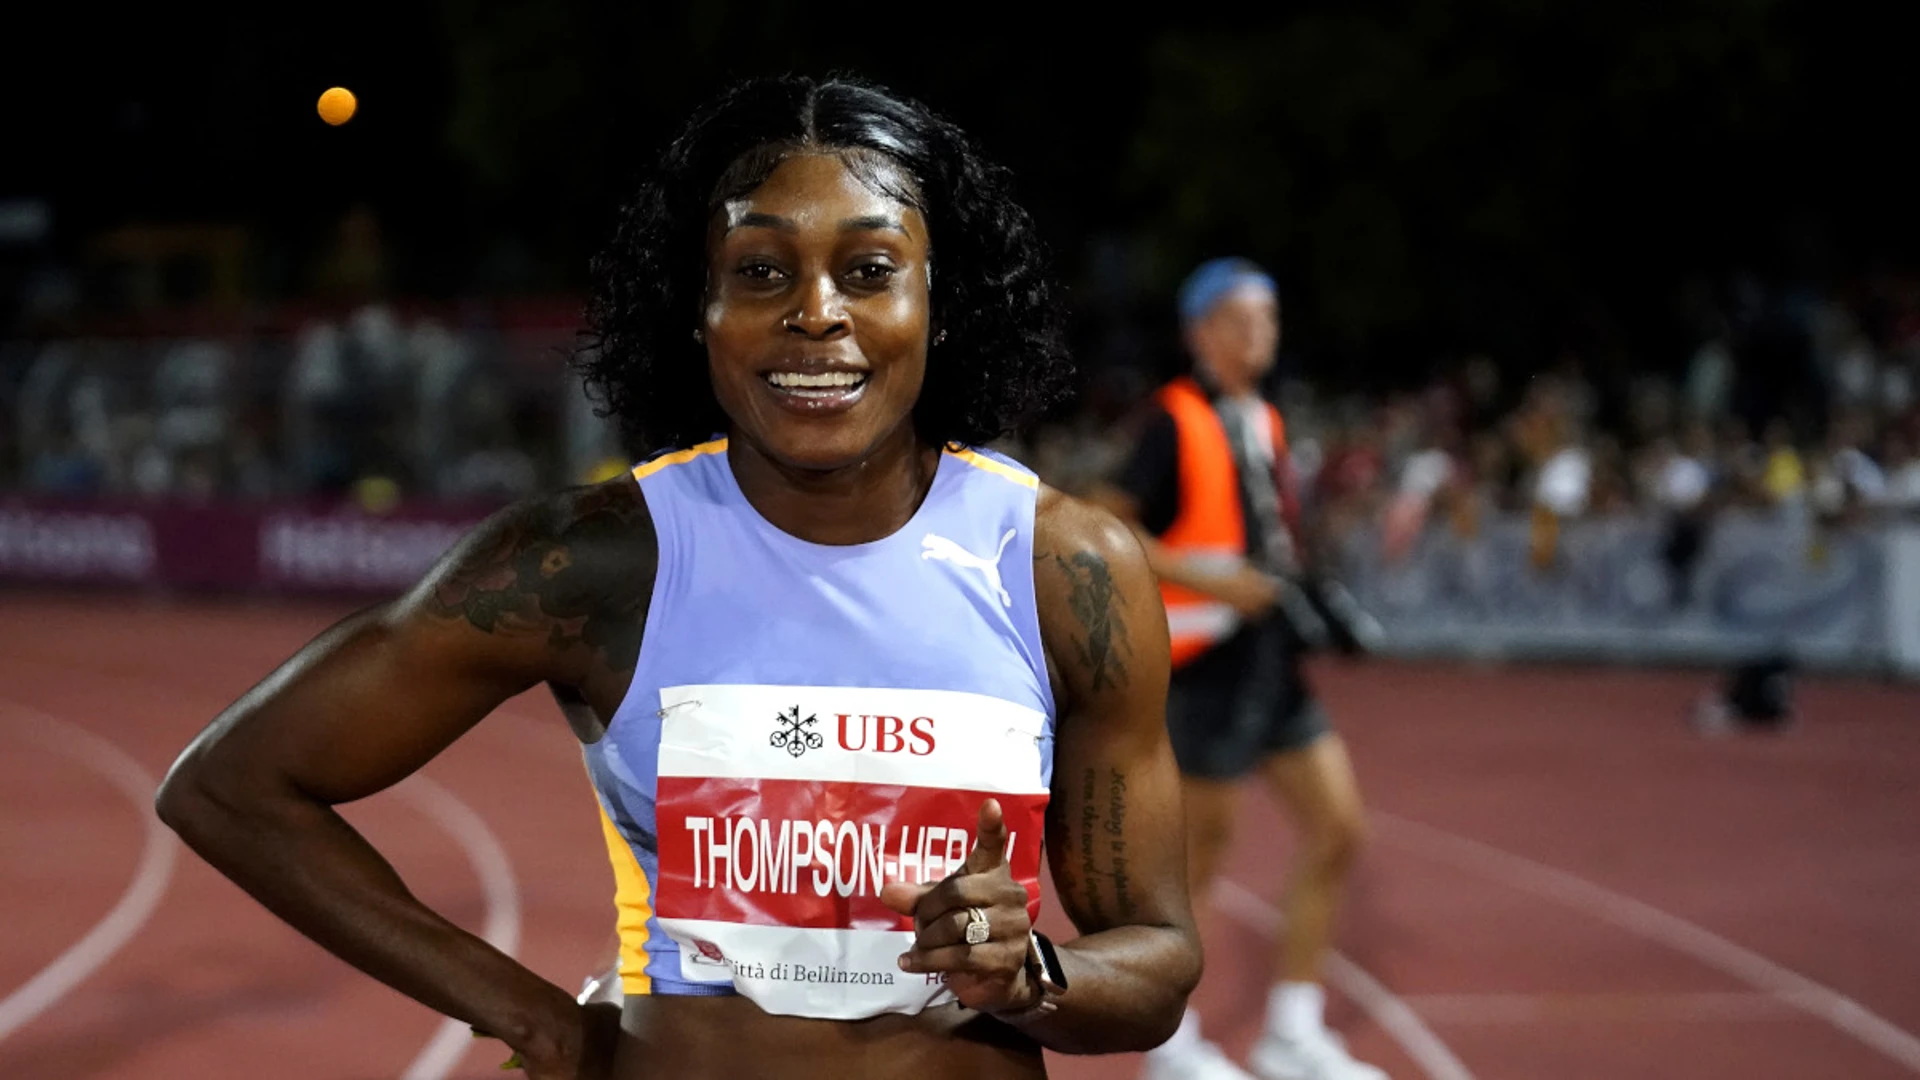 Injured Jamaican sprint star Thompson-Herah out of Olympics: statement